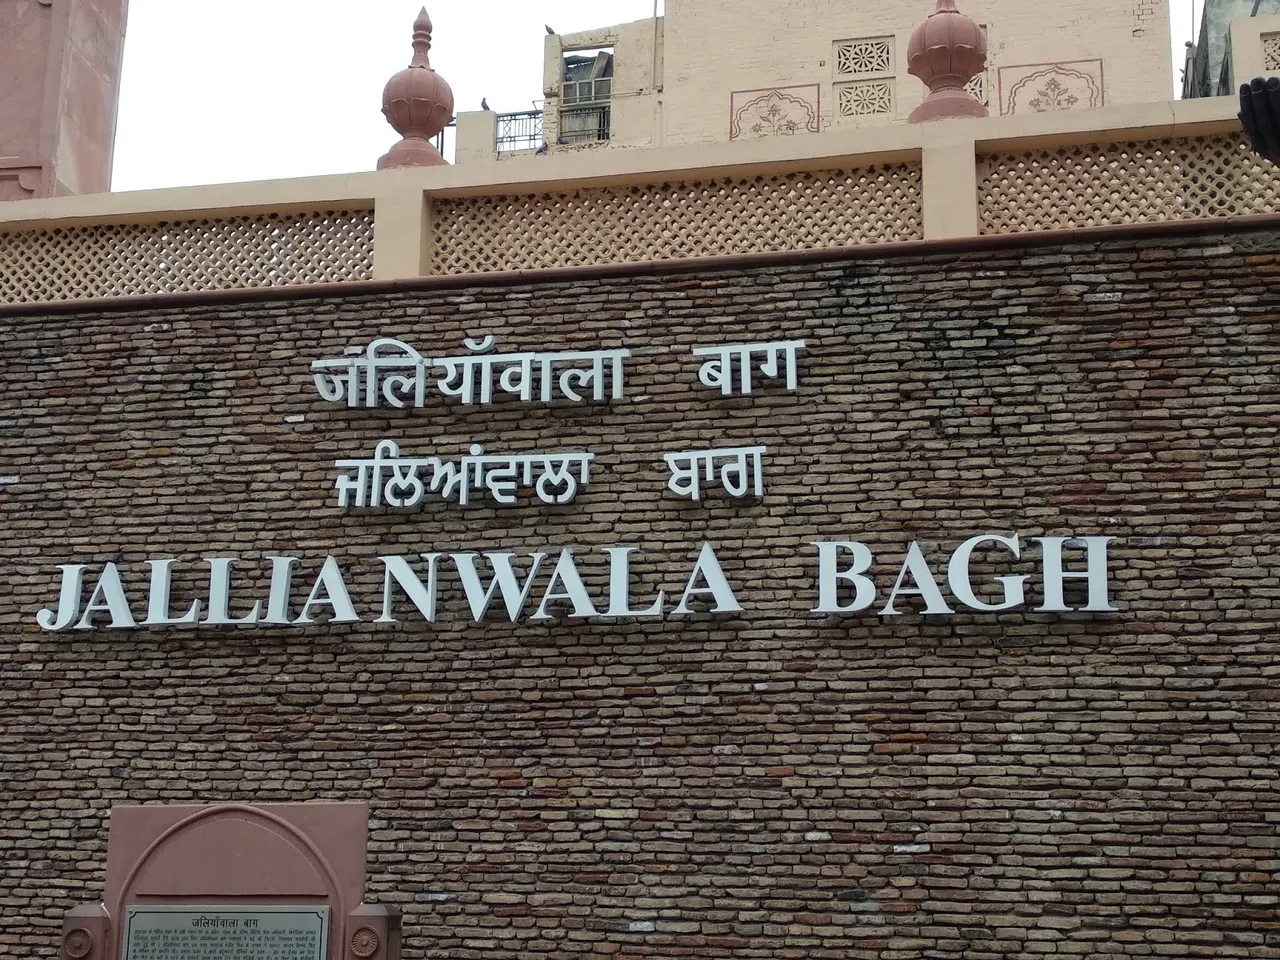 Jallianwala Bagh complex in Amritsar restored with utmost respect, claims Culture Ministry